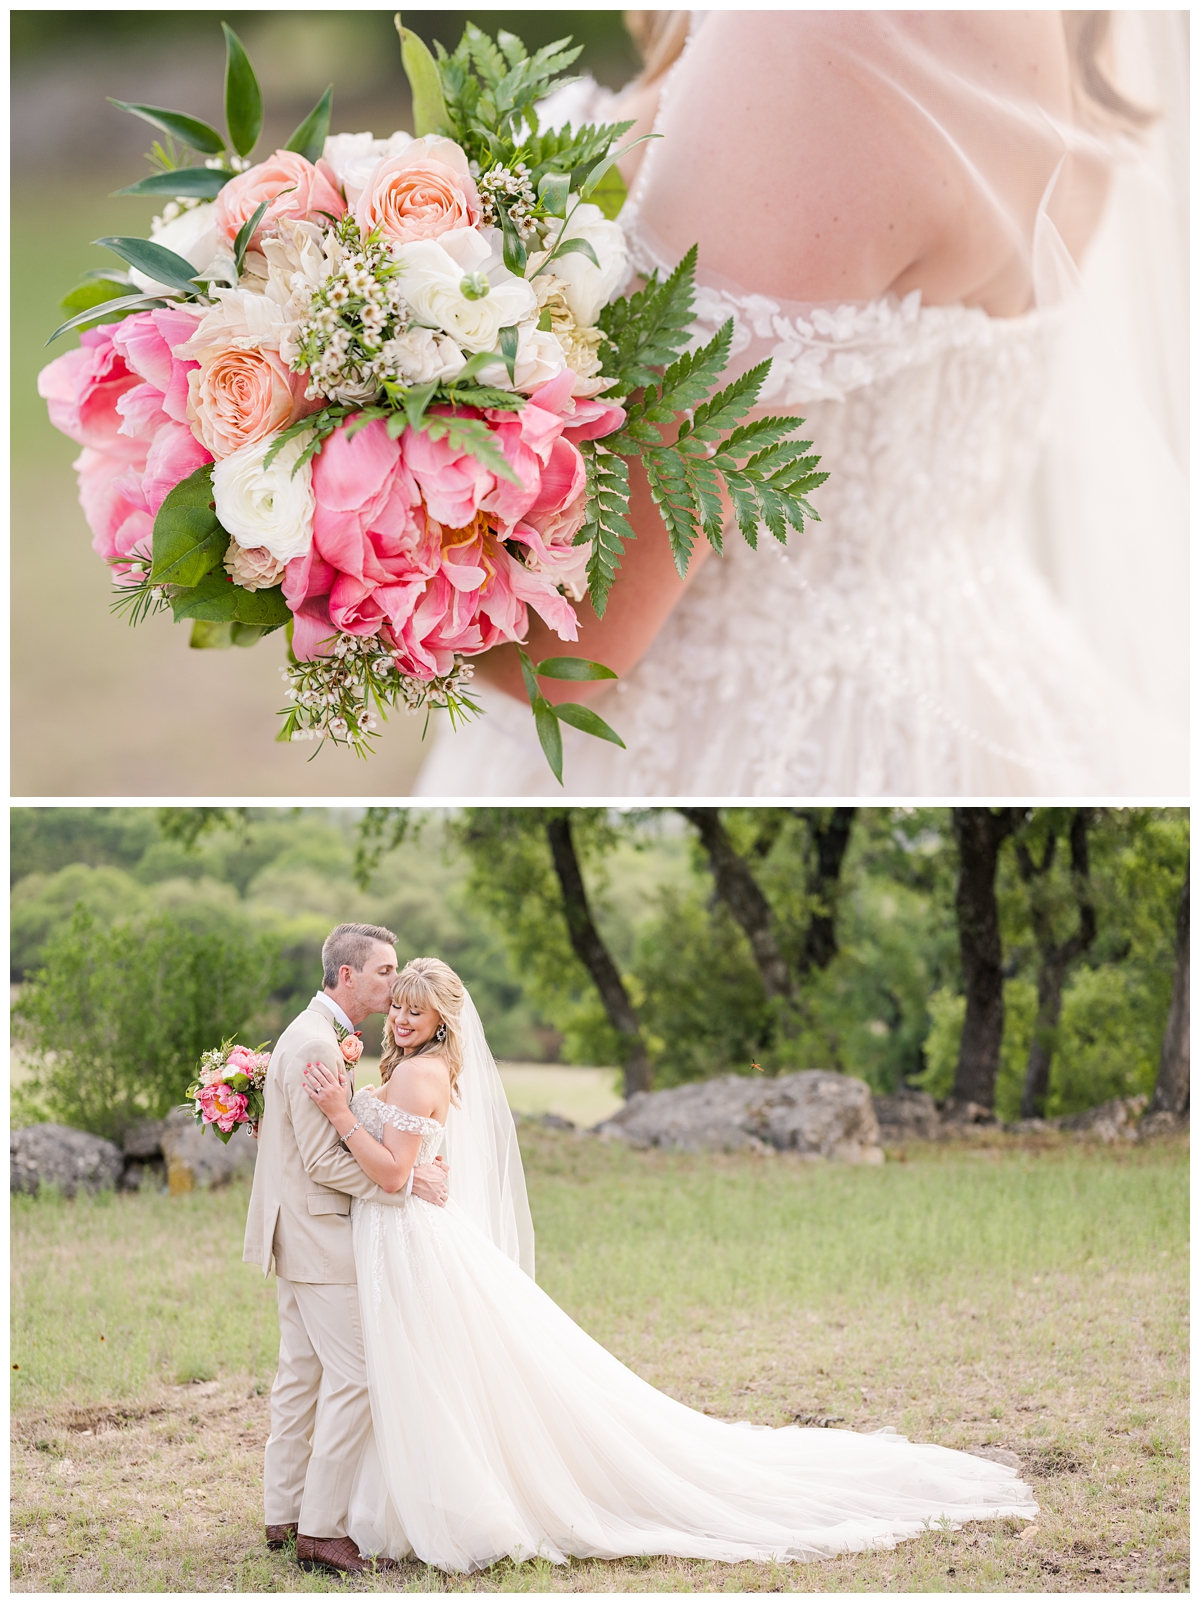 Bridal Bouquet in soft sunset colors